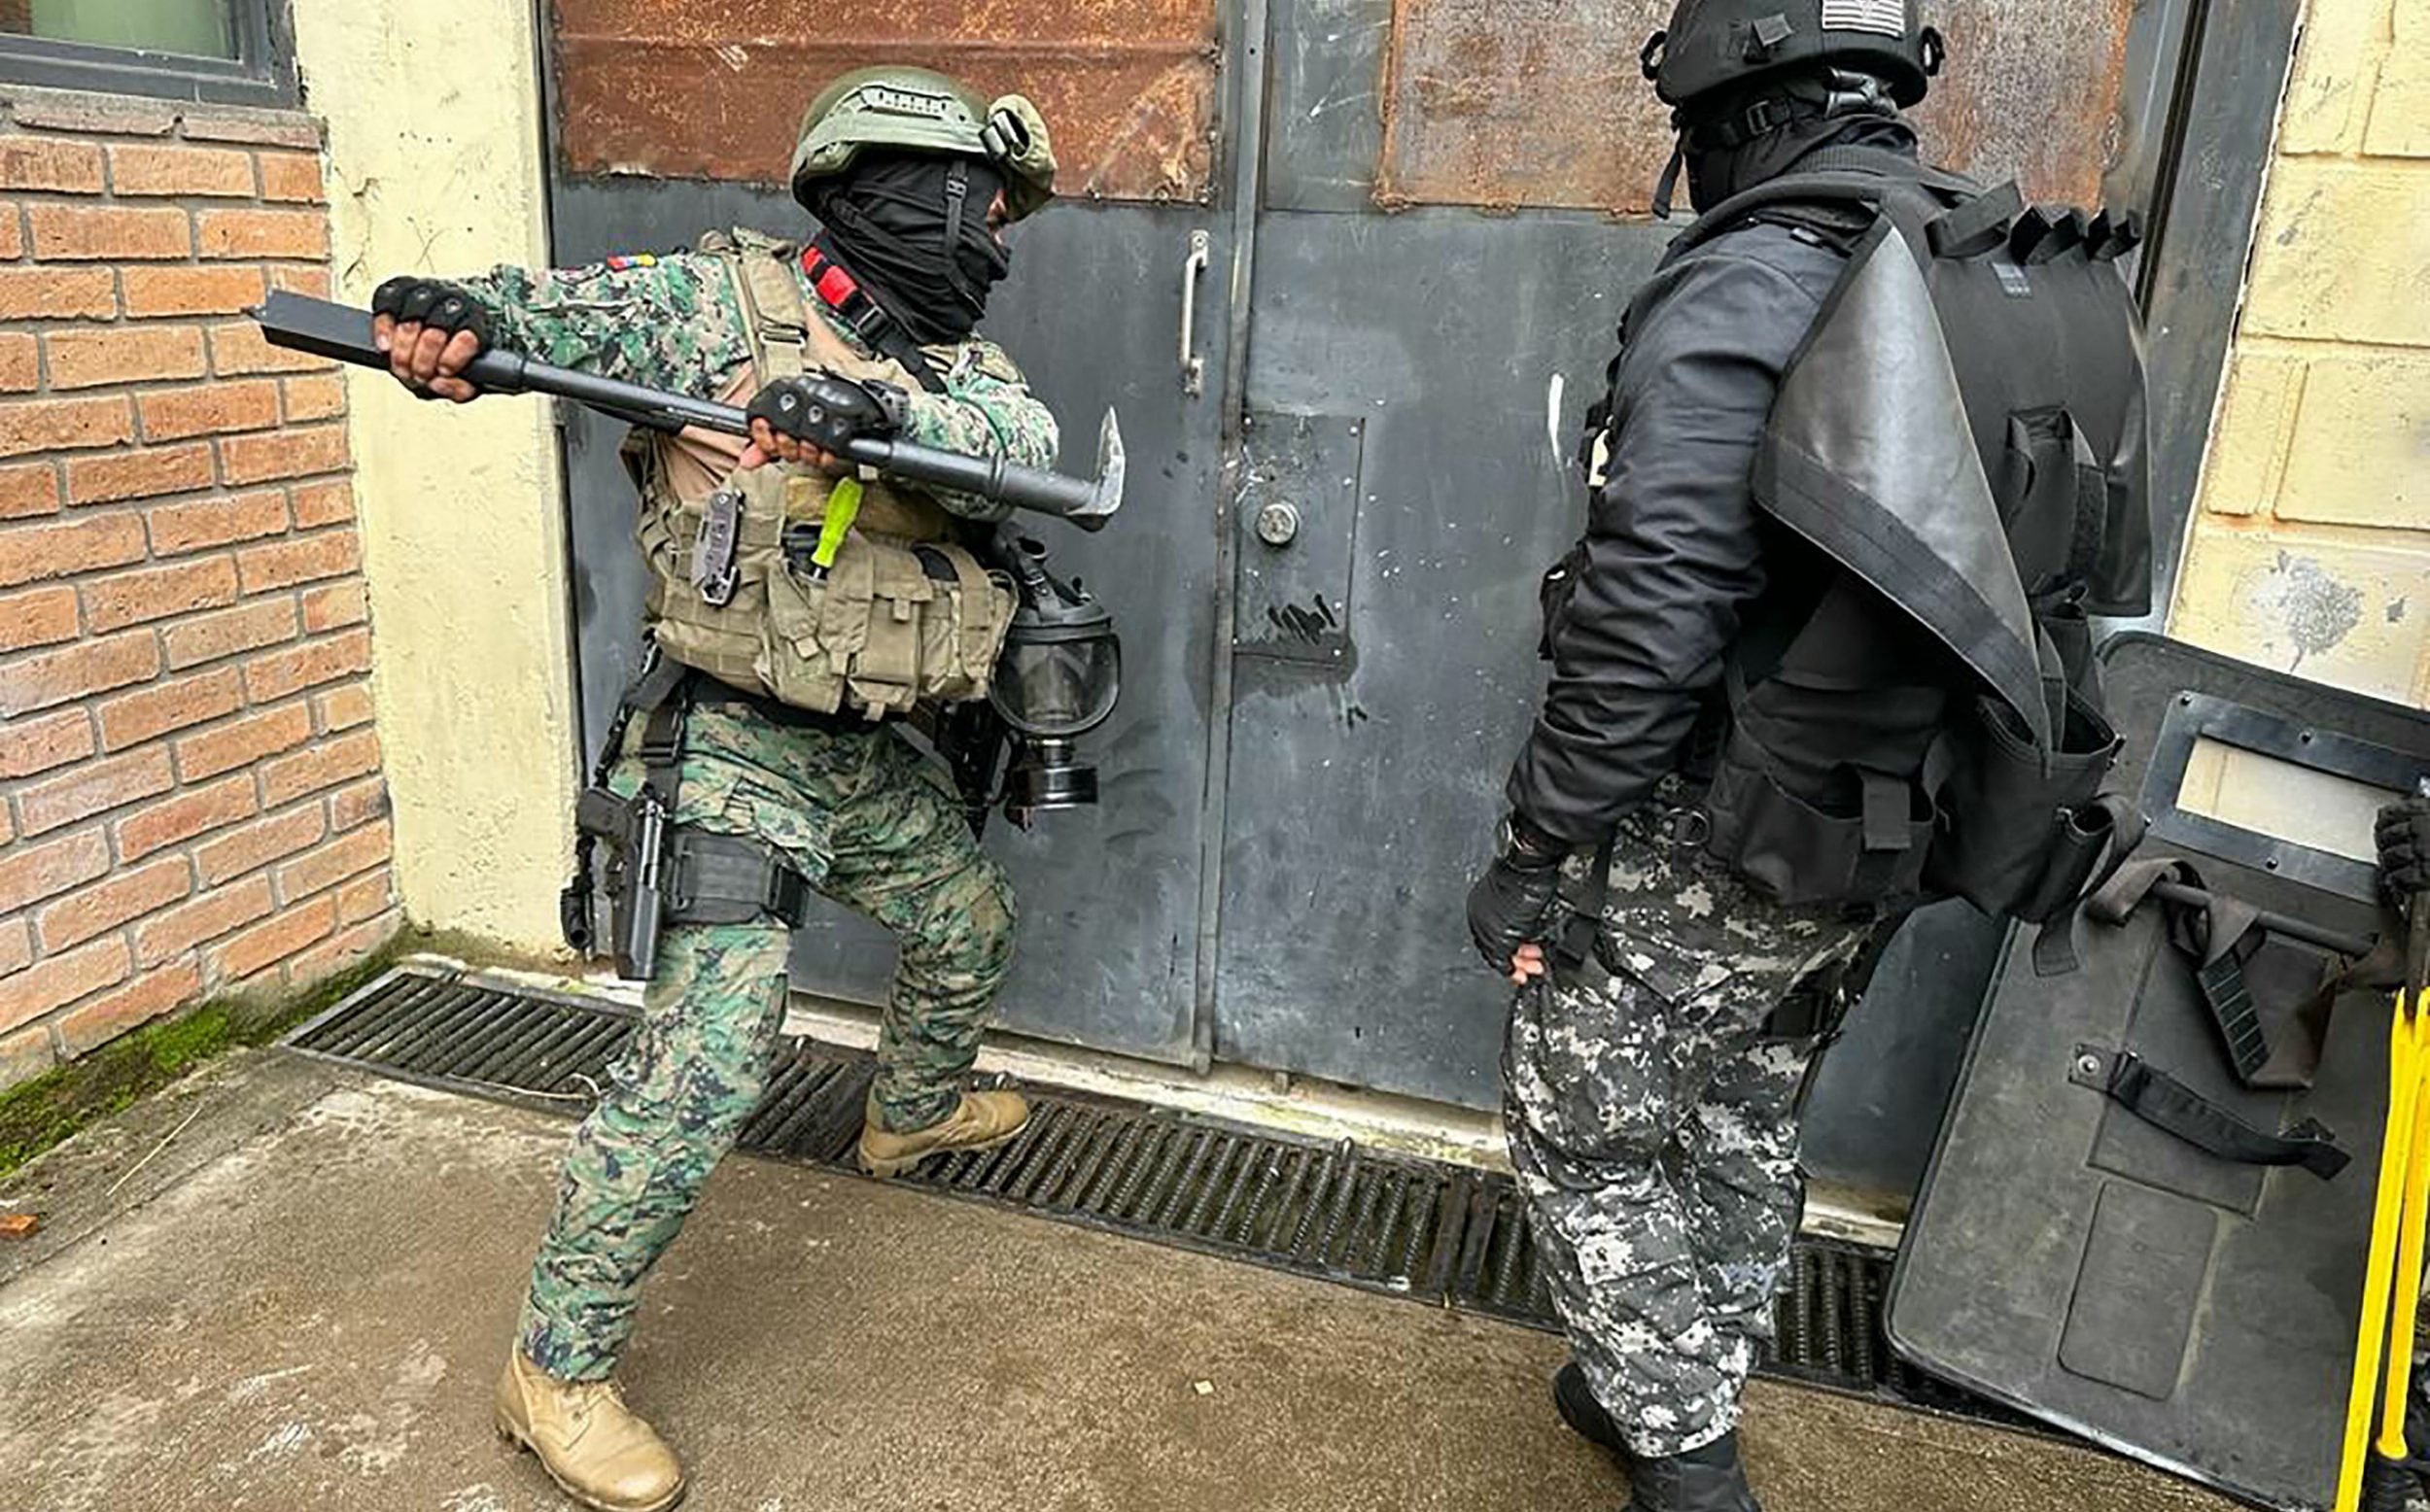 ecuador regains control of prisons after gangs abducted guards